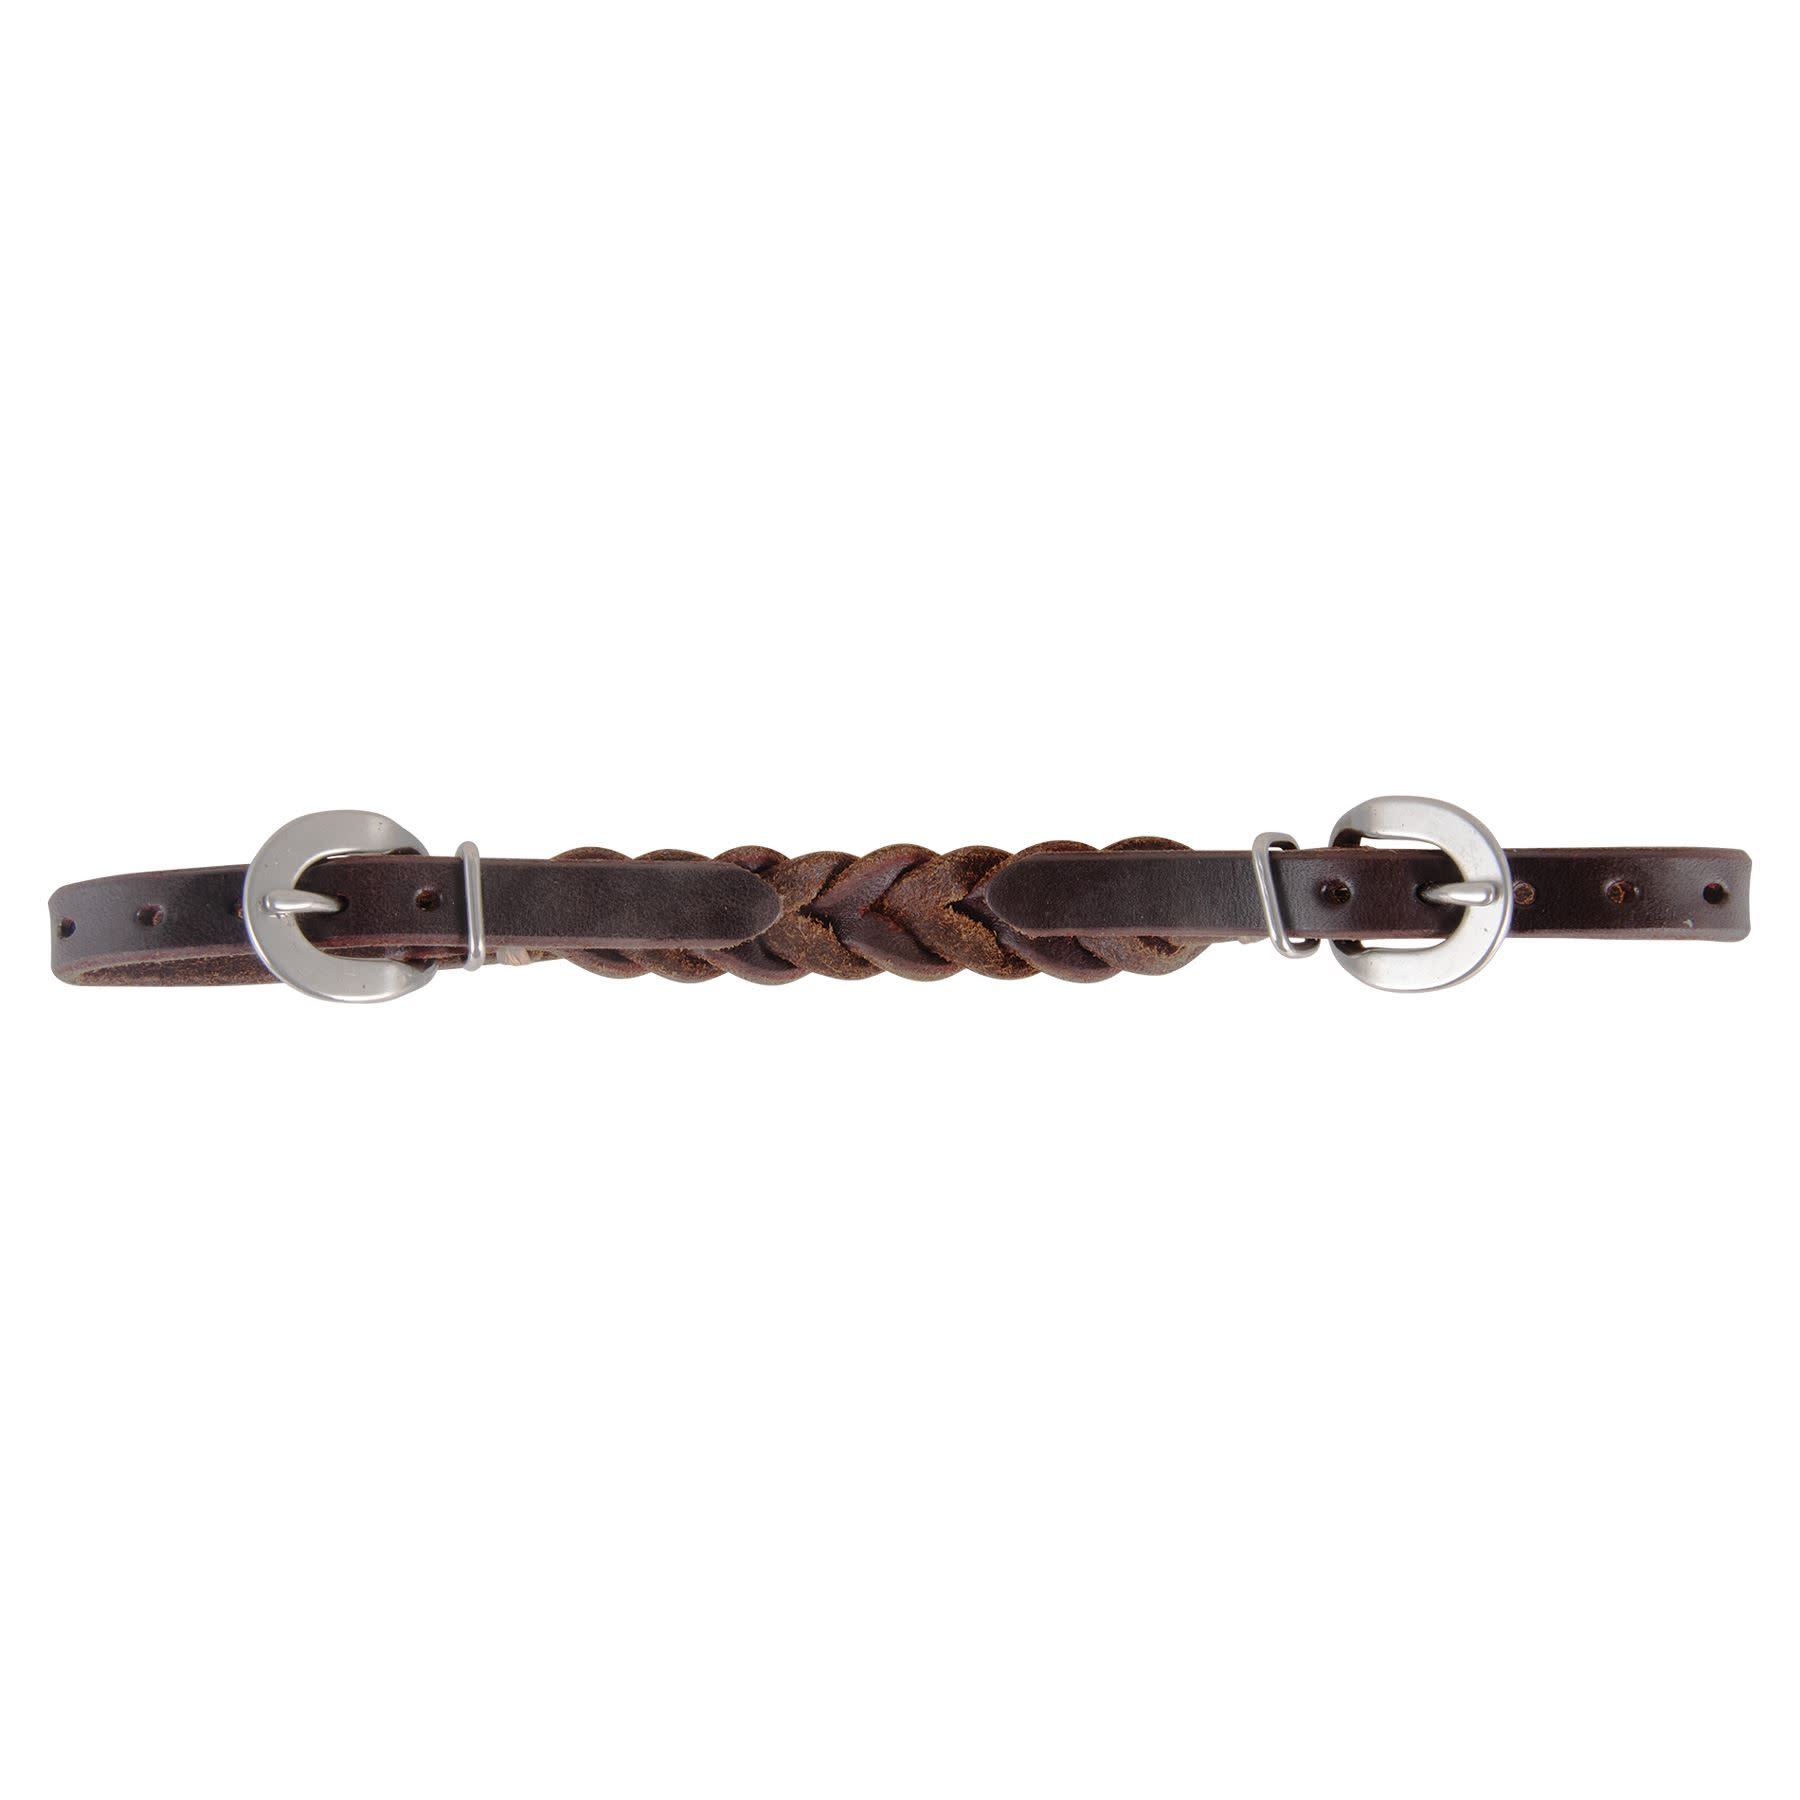 Braided Leather Strap for Purses